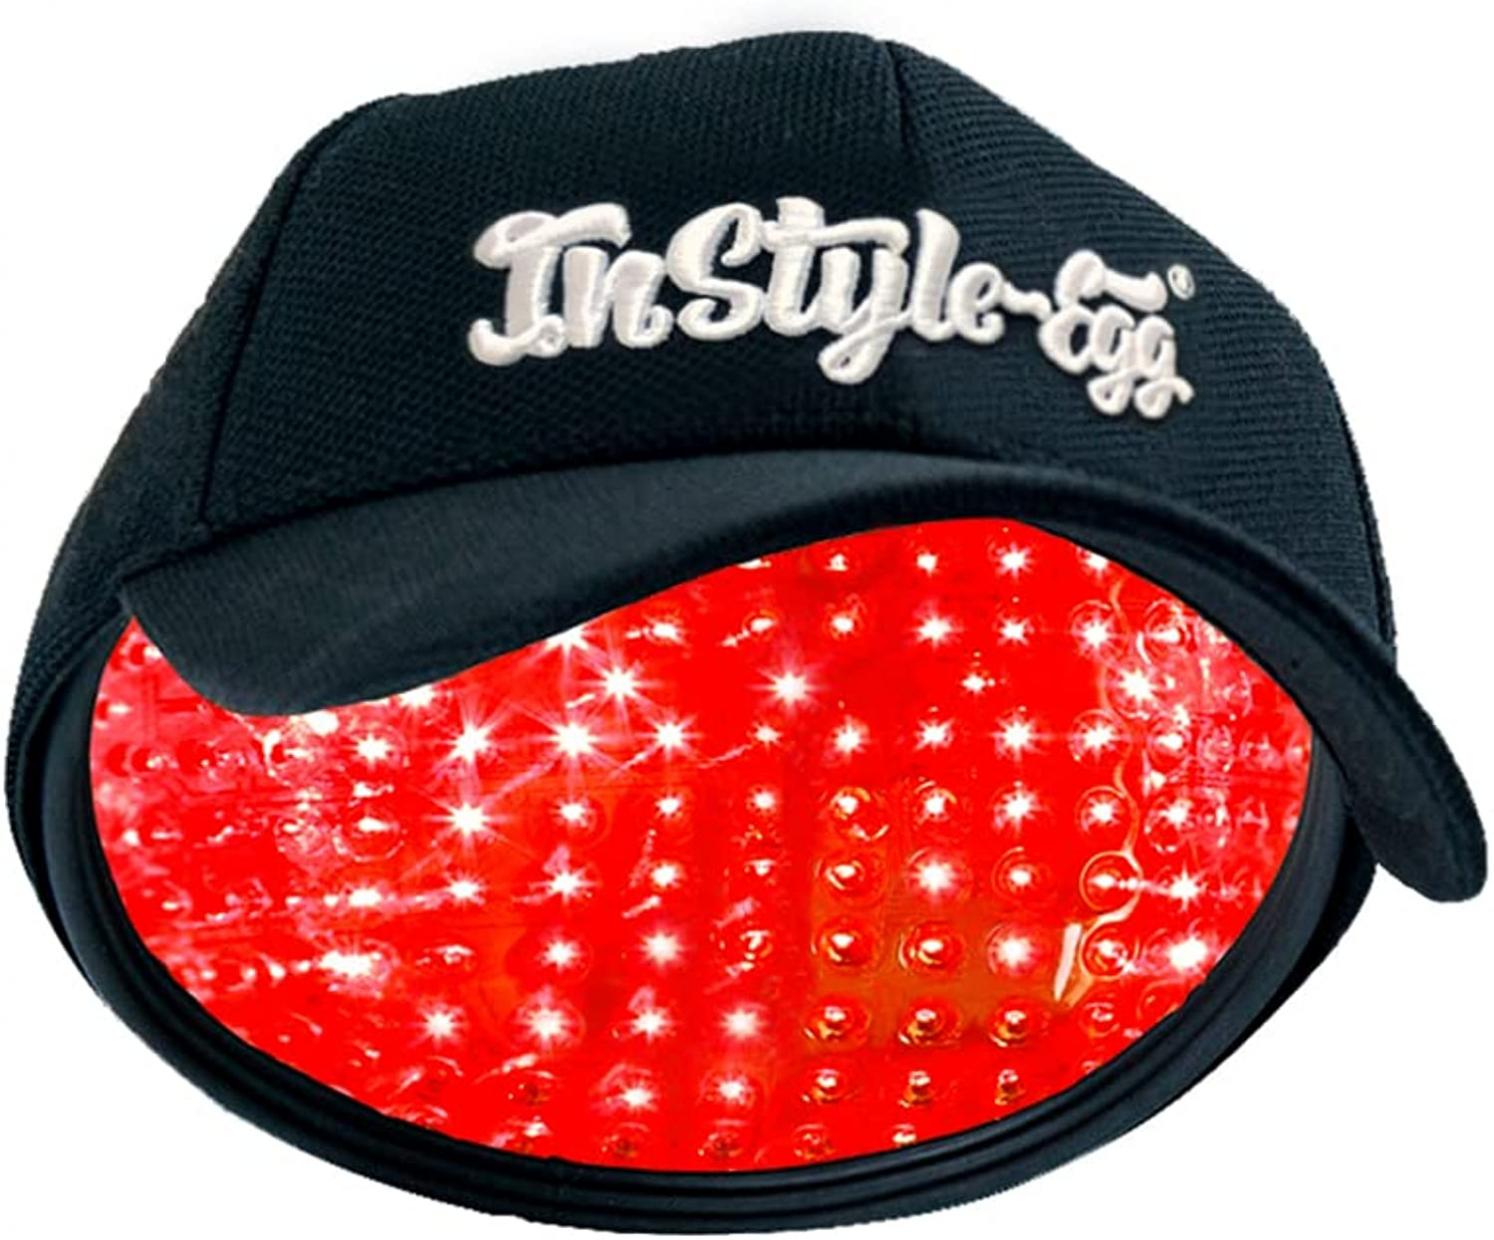 InStyle-Egg Laser Cap for Hair Growth – with 280 Medical Grade Lasers, FDA Cleared Low Level Laser Therapy, Hair Regrowth System for Thinning Hair Treatment Men & Women, Uses Red Light Therapy